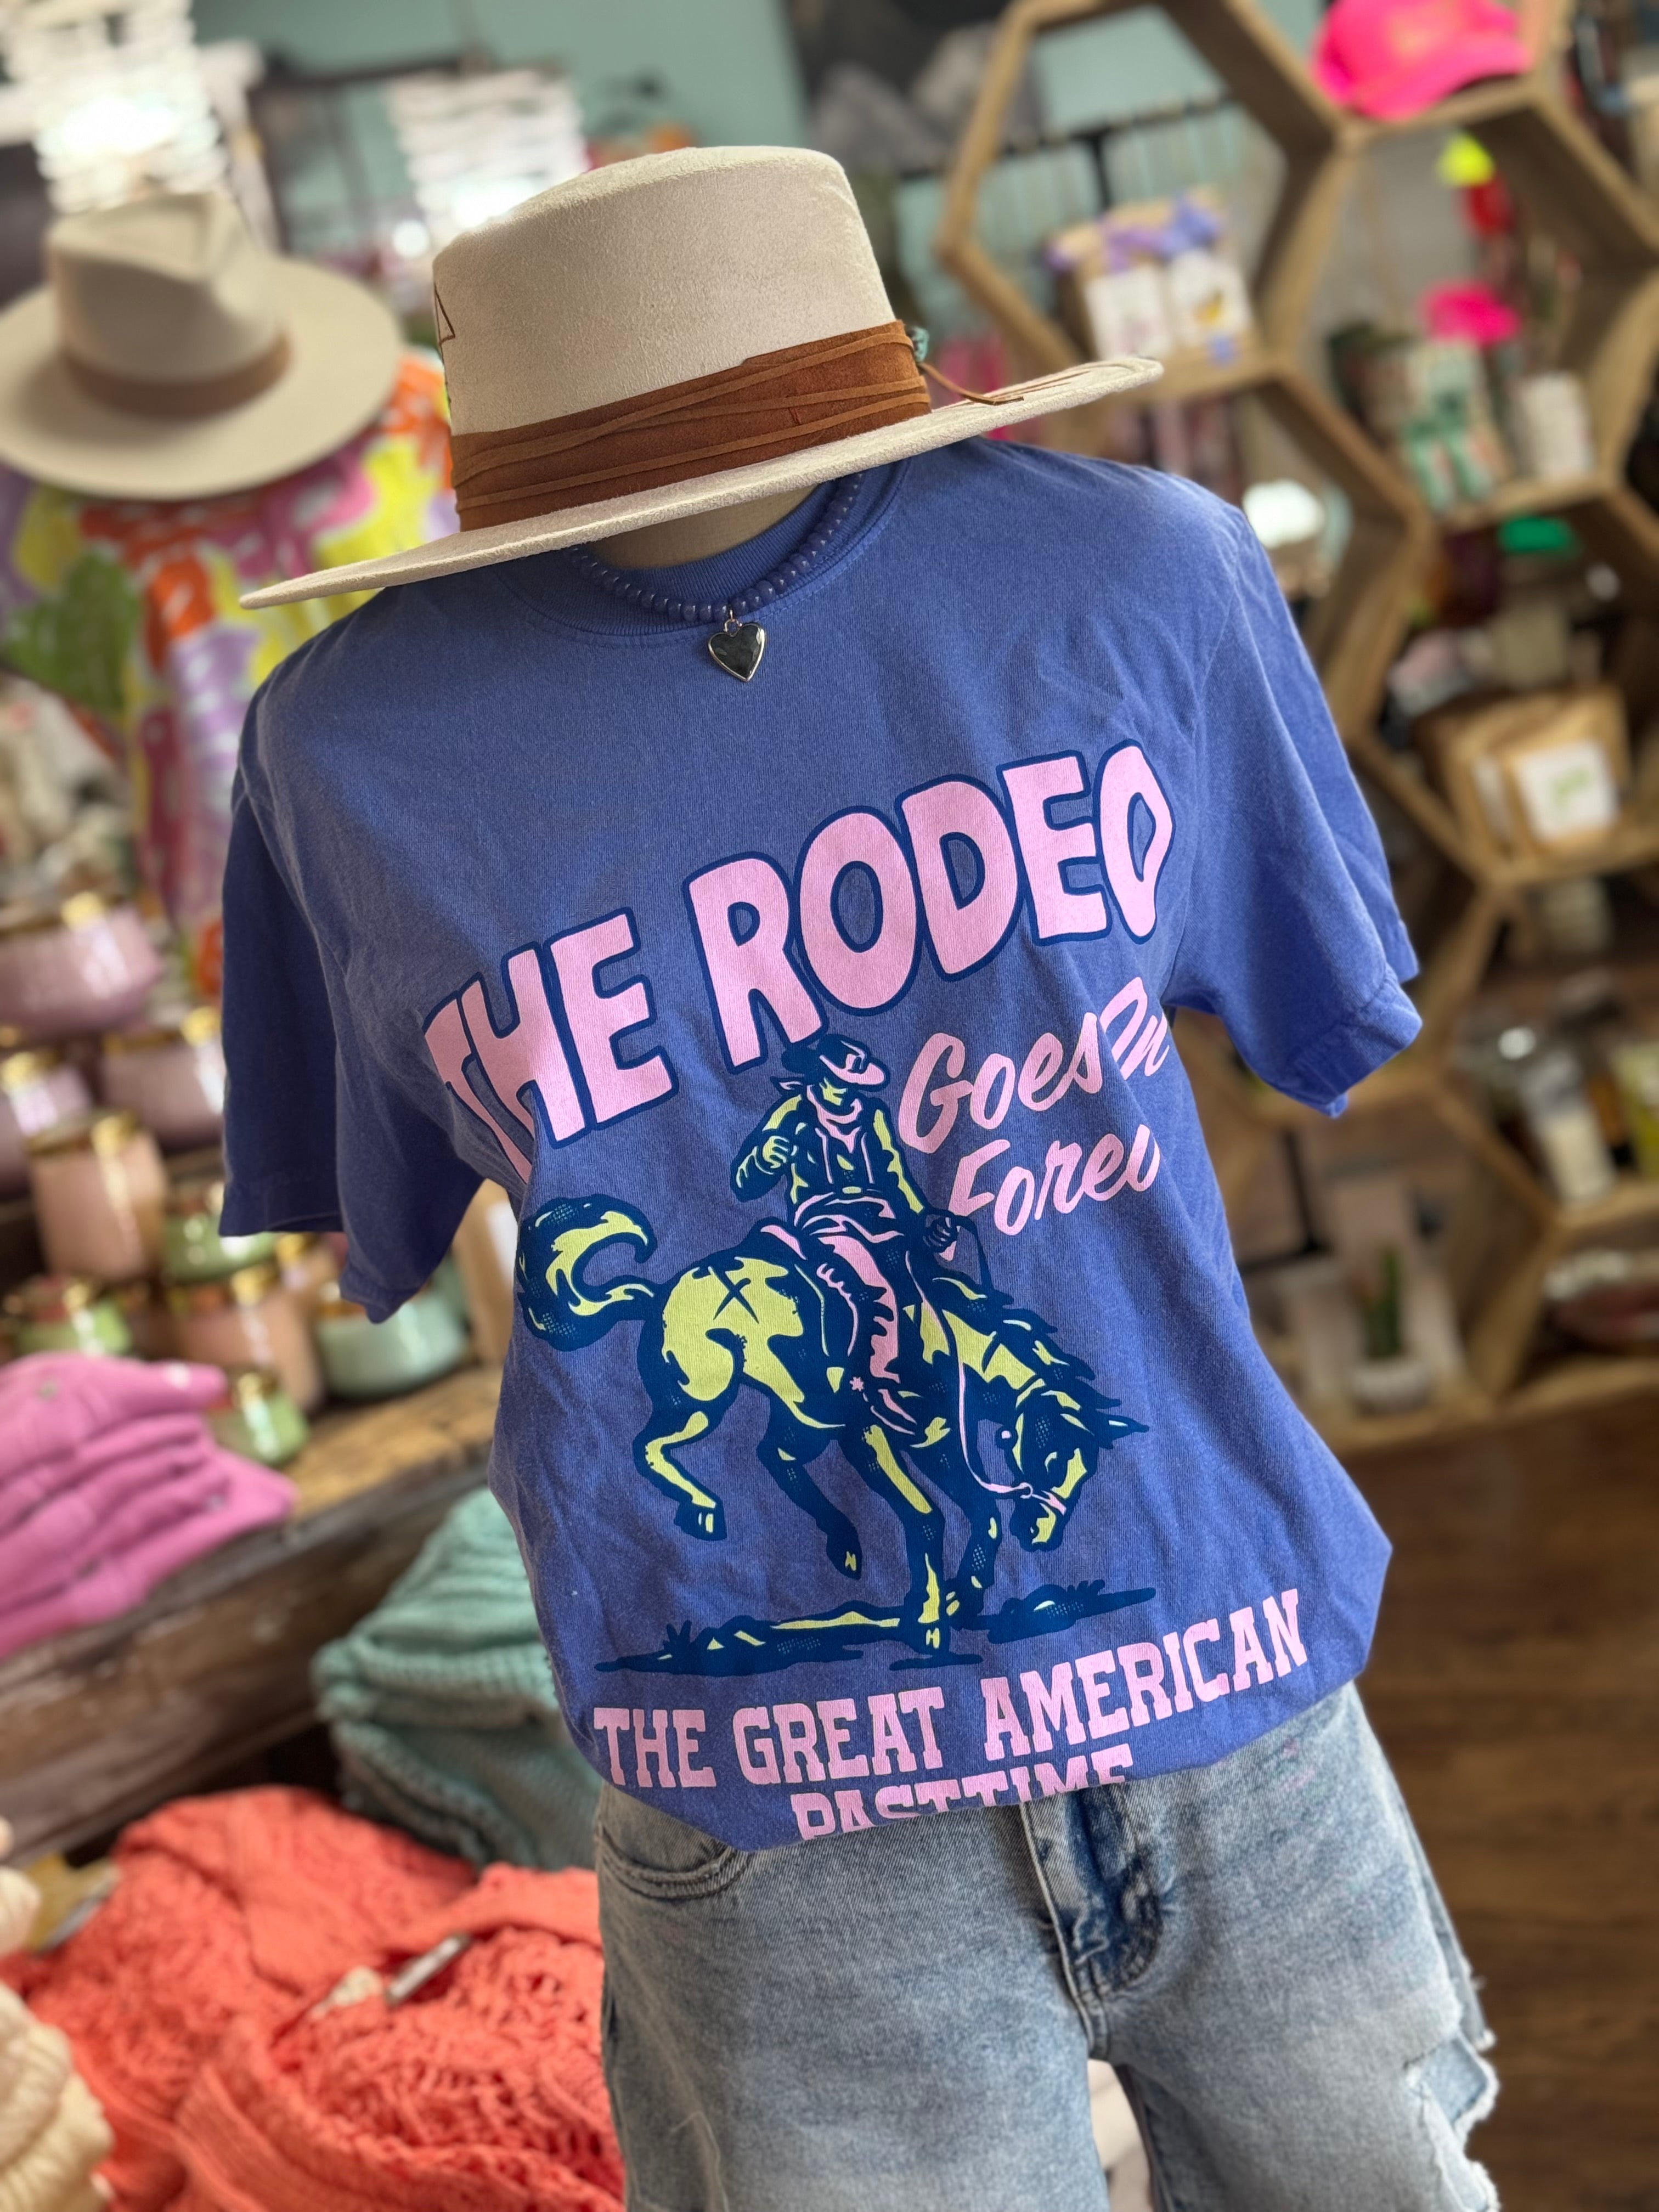 The Rodeo Goes On Forever